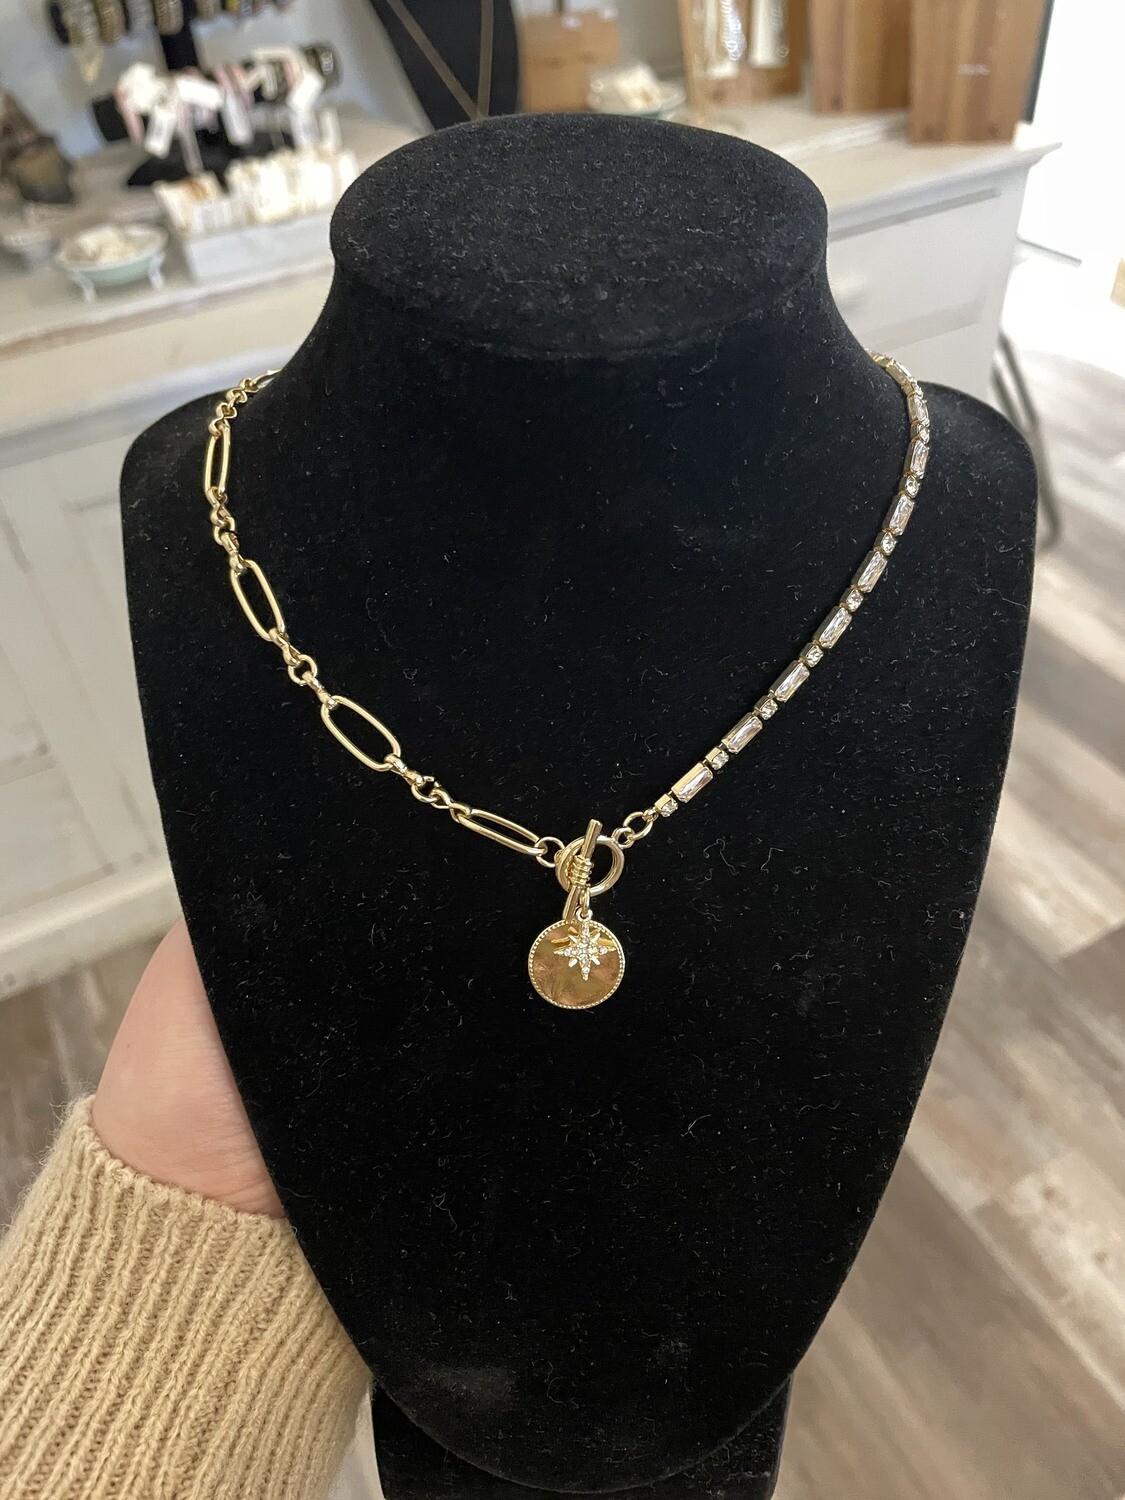 Stone and Chain Necklace with Charm